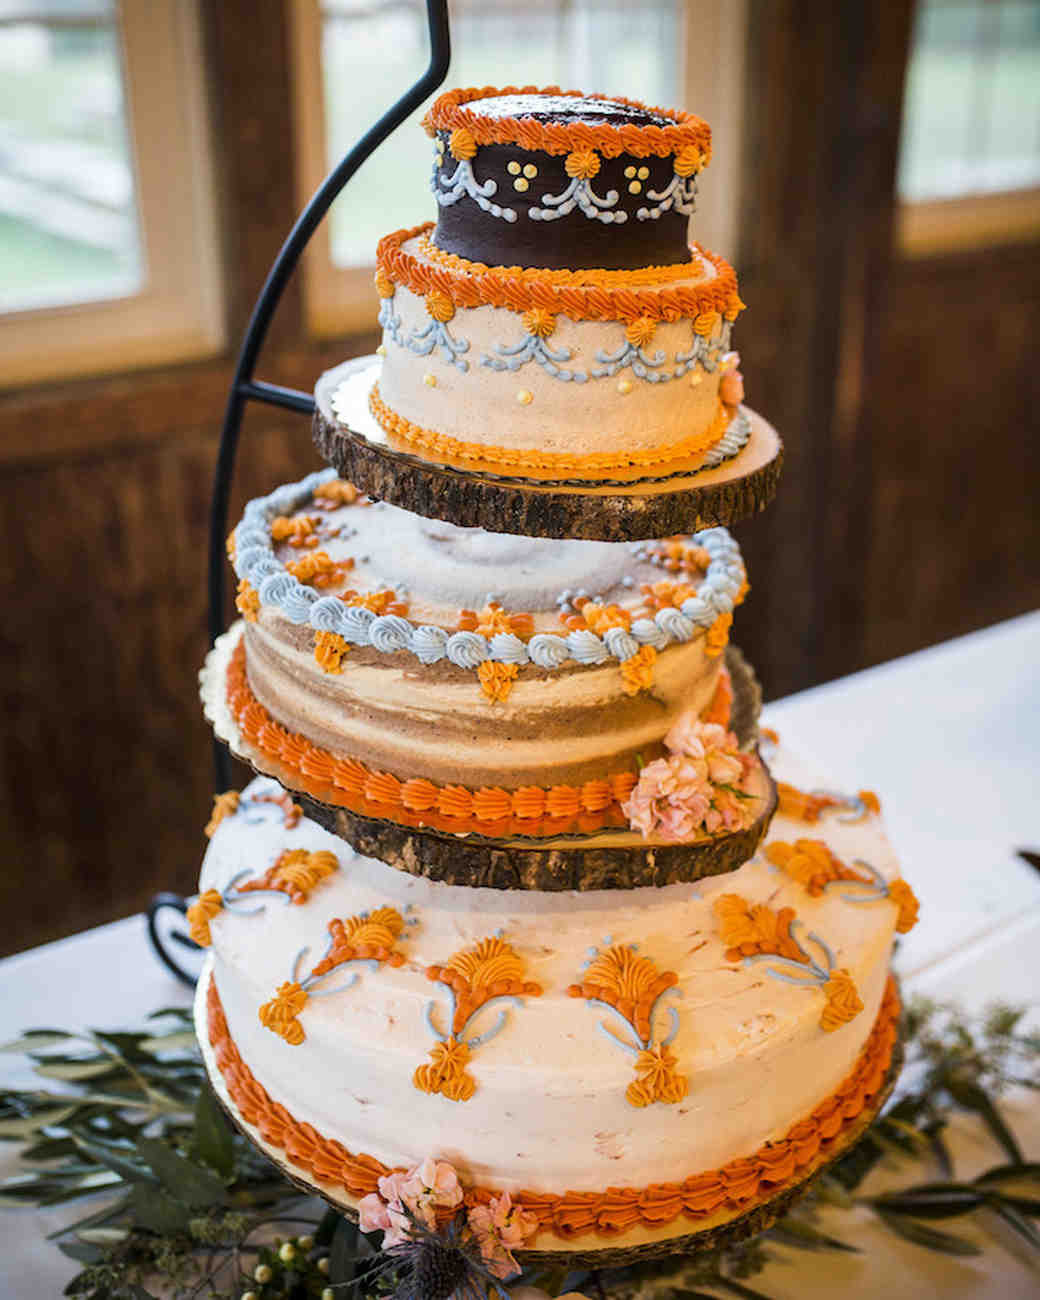 Don’t Miss Our 15 Most Shared Vegan Wedding Cakes